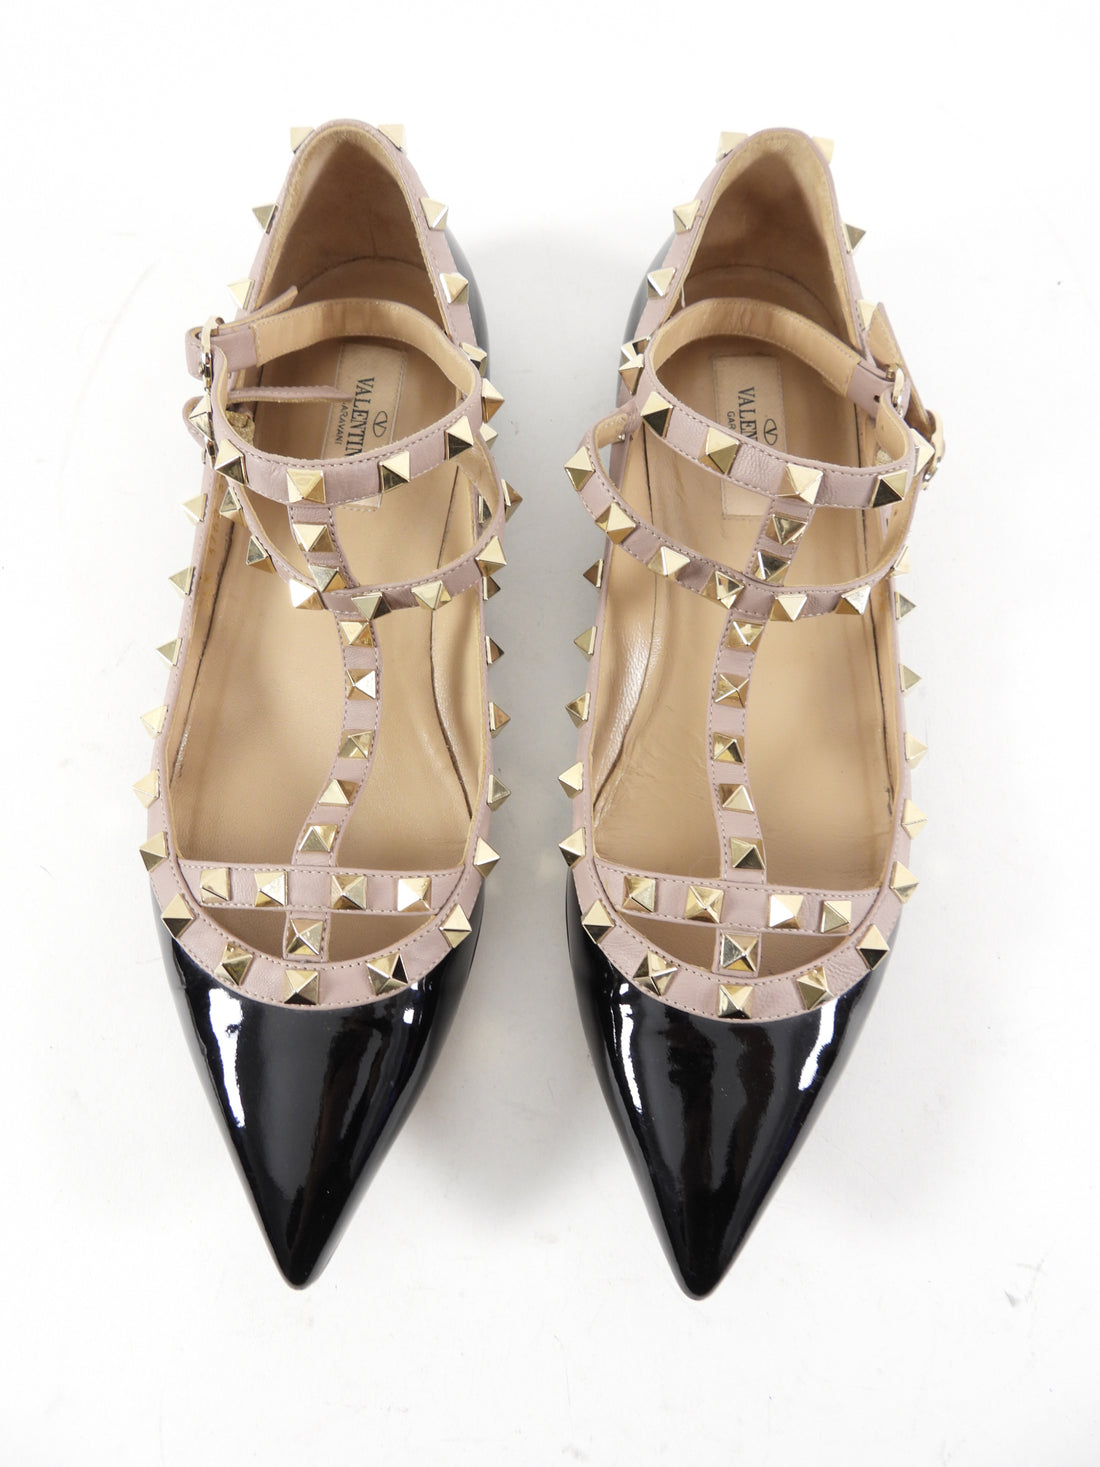 Valentino Black Patent and Nude Rock Stud Flat Shoes - 39.5 / 9